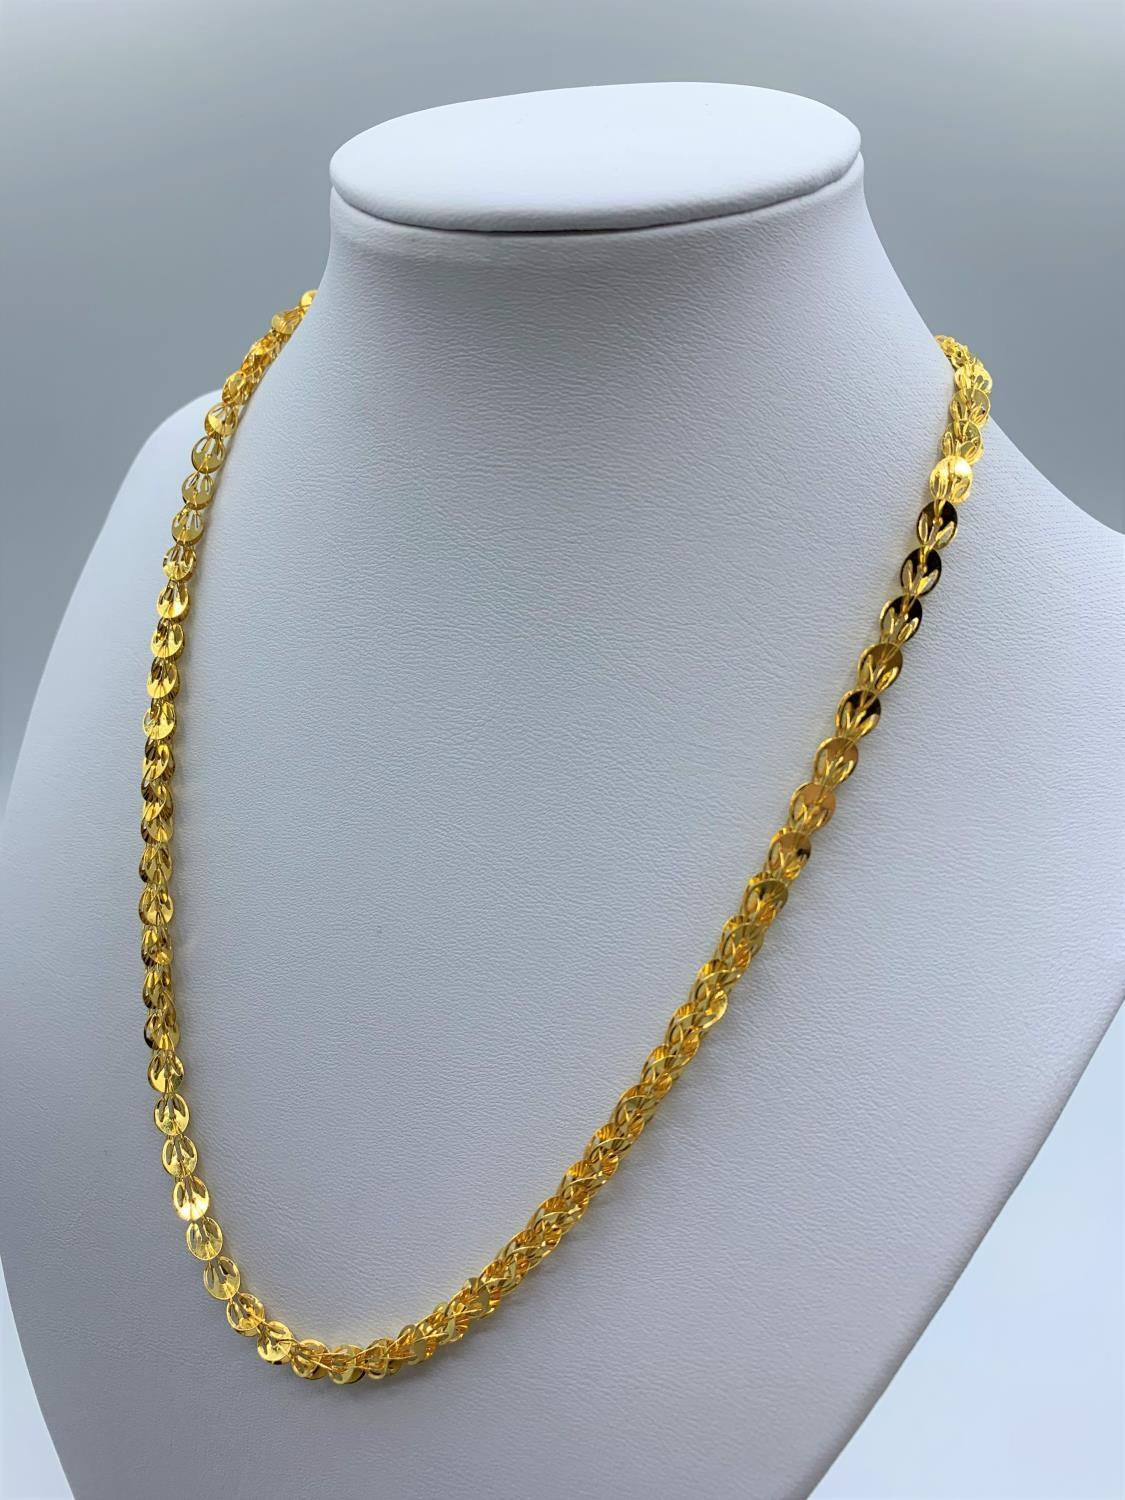 24ct Gold Necklace From The Far East Intricate Unique Design 16.4g 45cm - Image 3 of 10